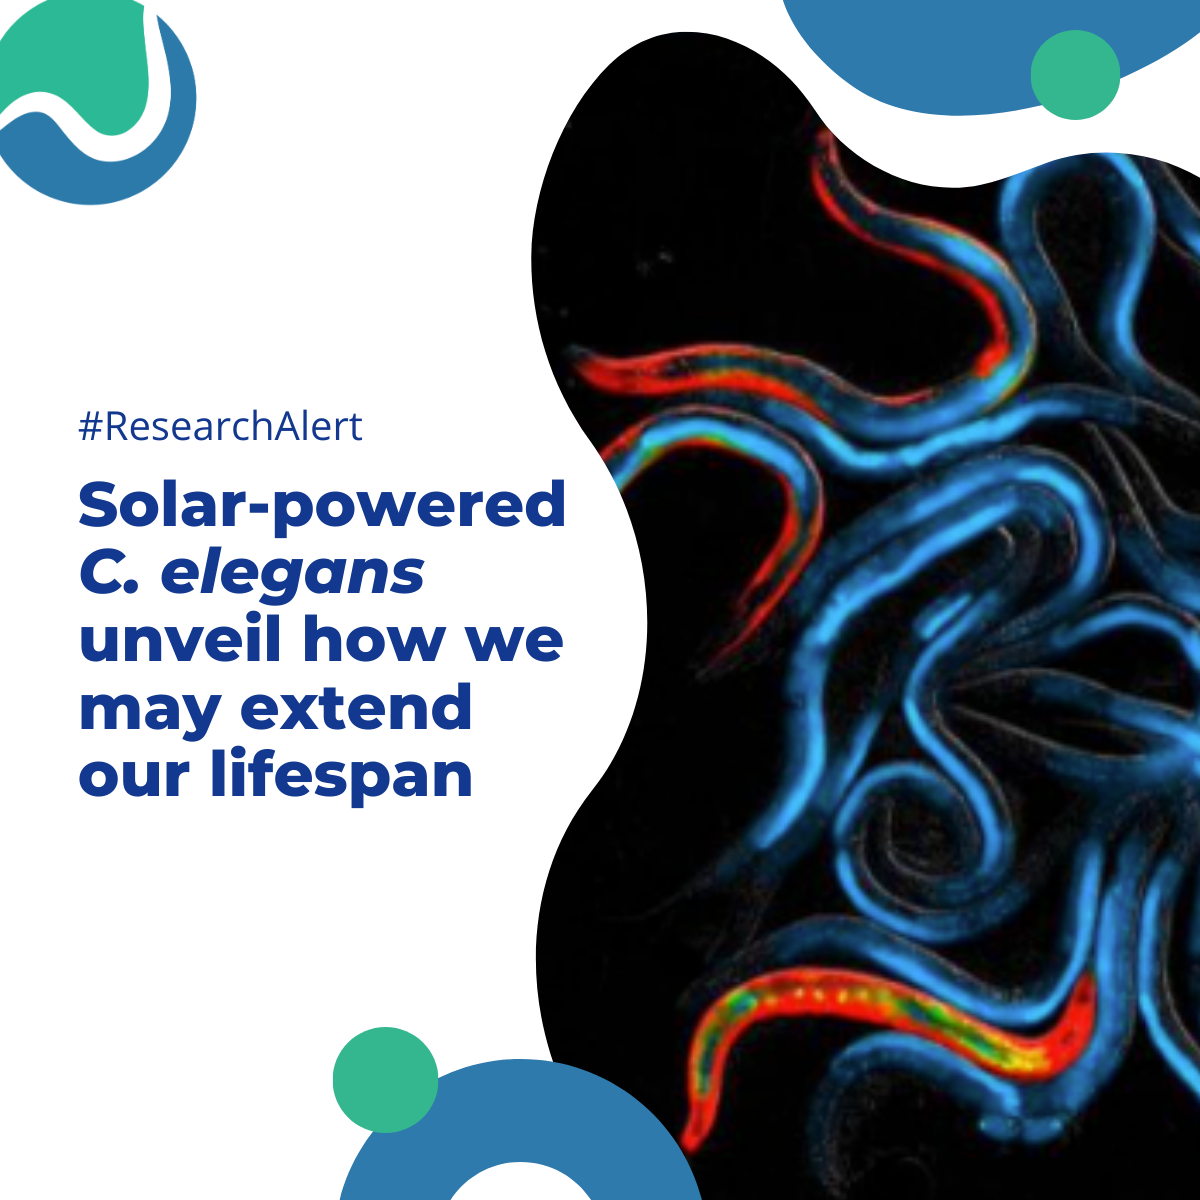 #ResearchAlert Solar-powered C. elegans unveil how we may extend our lifespan